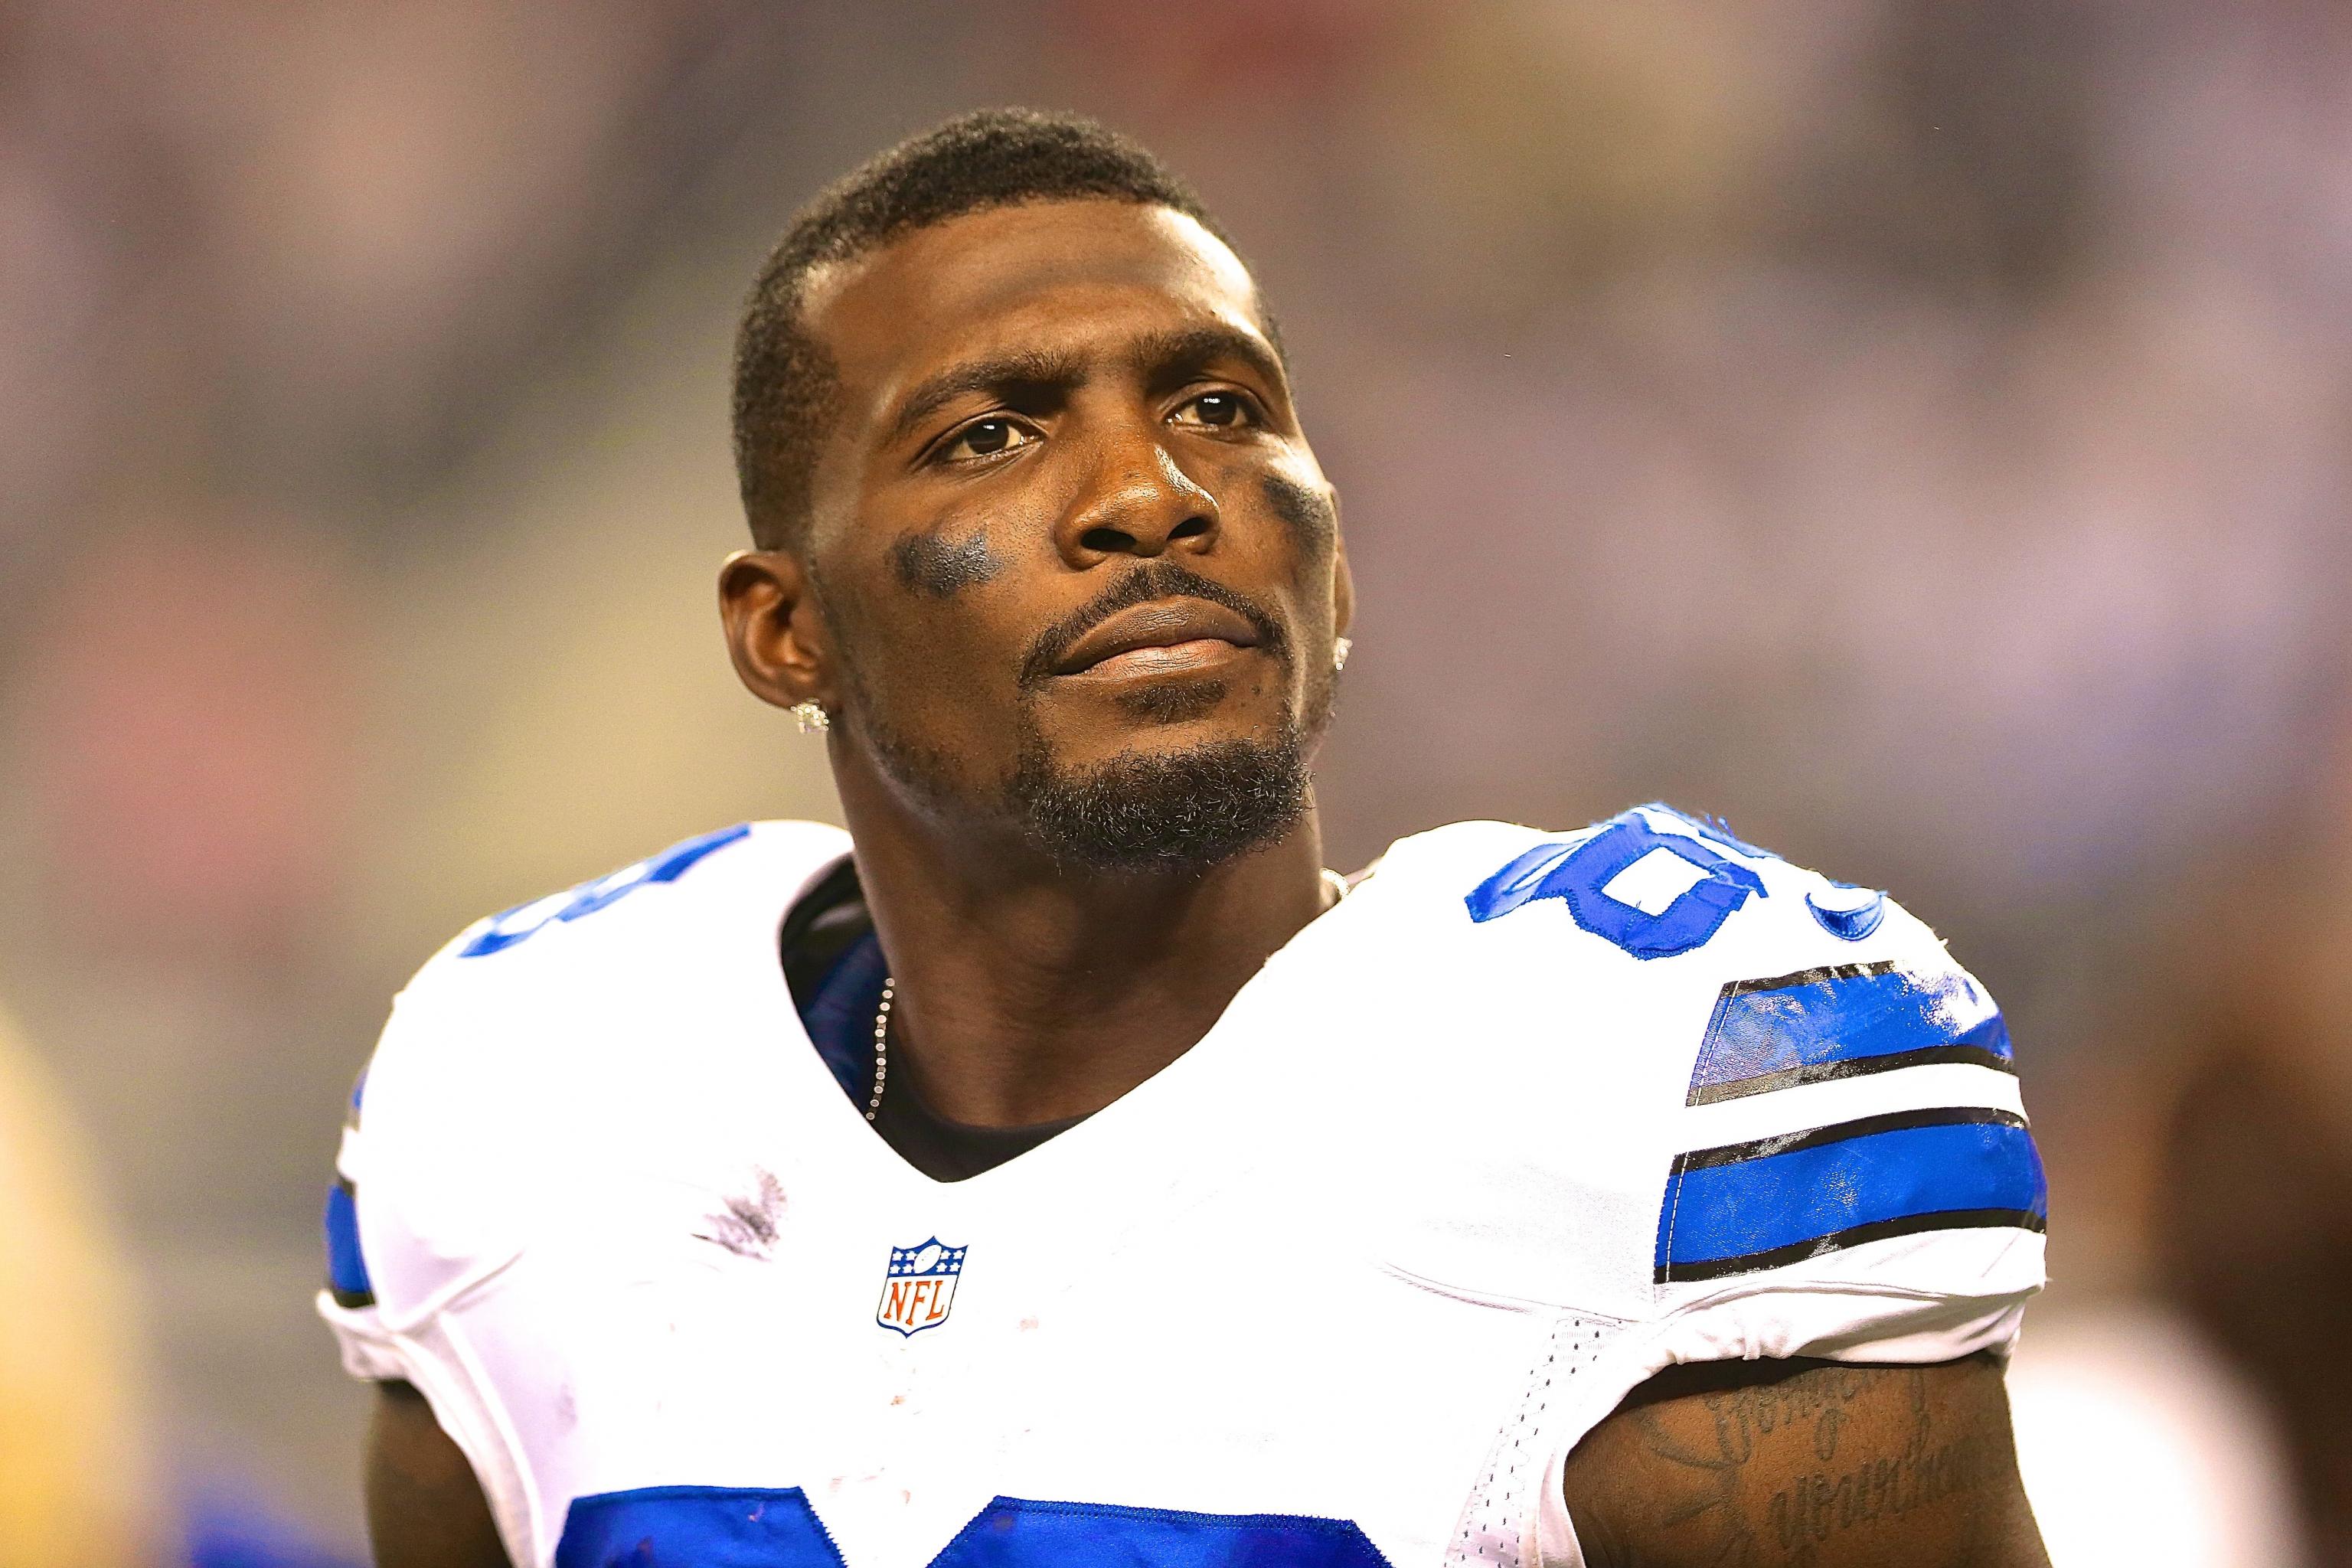 Former NCAA target Dez Bryant has mixed feelings about Johnny Manziel case  